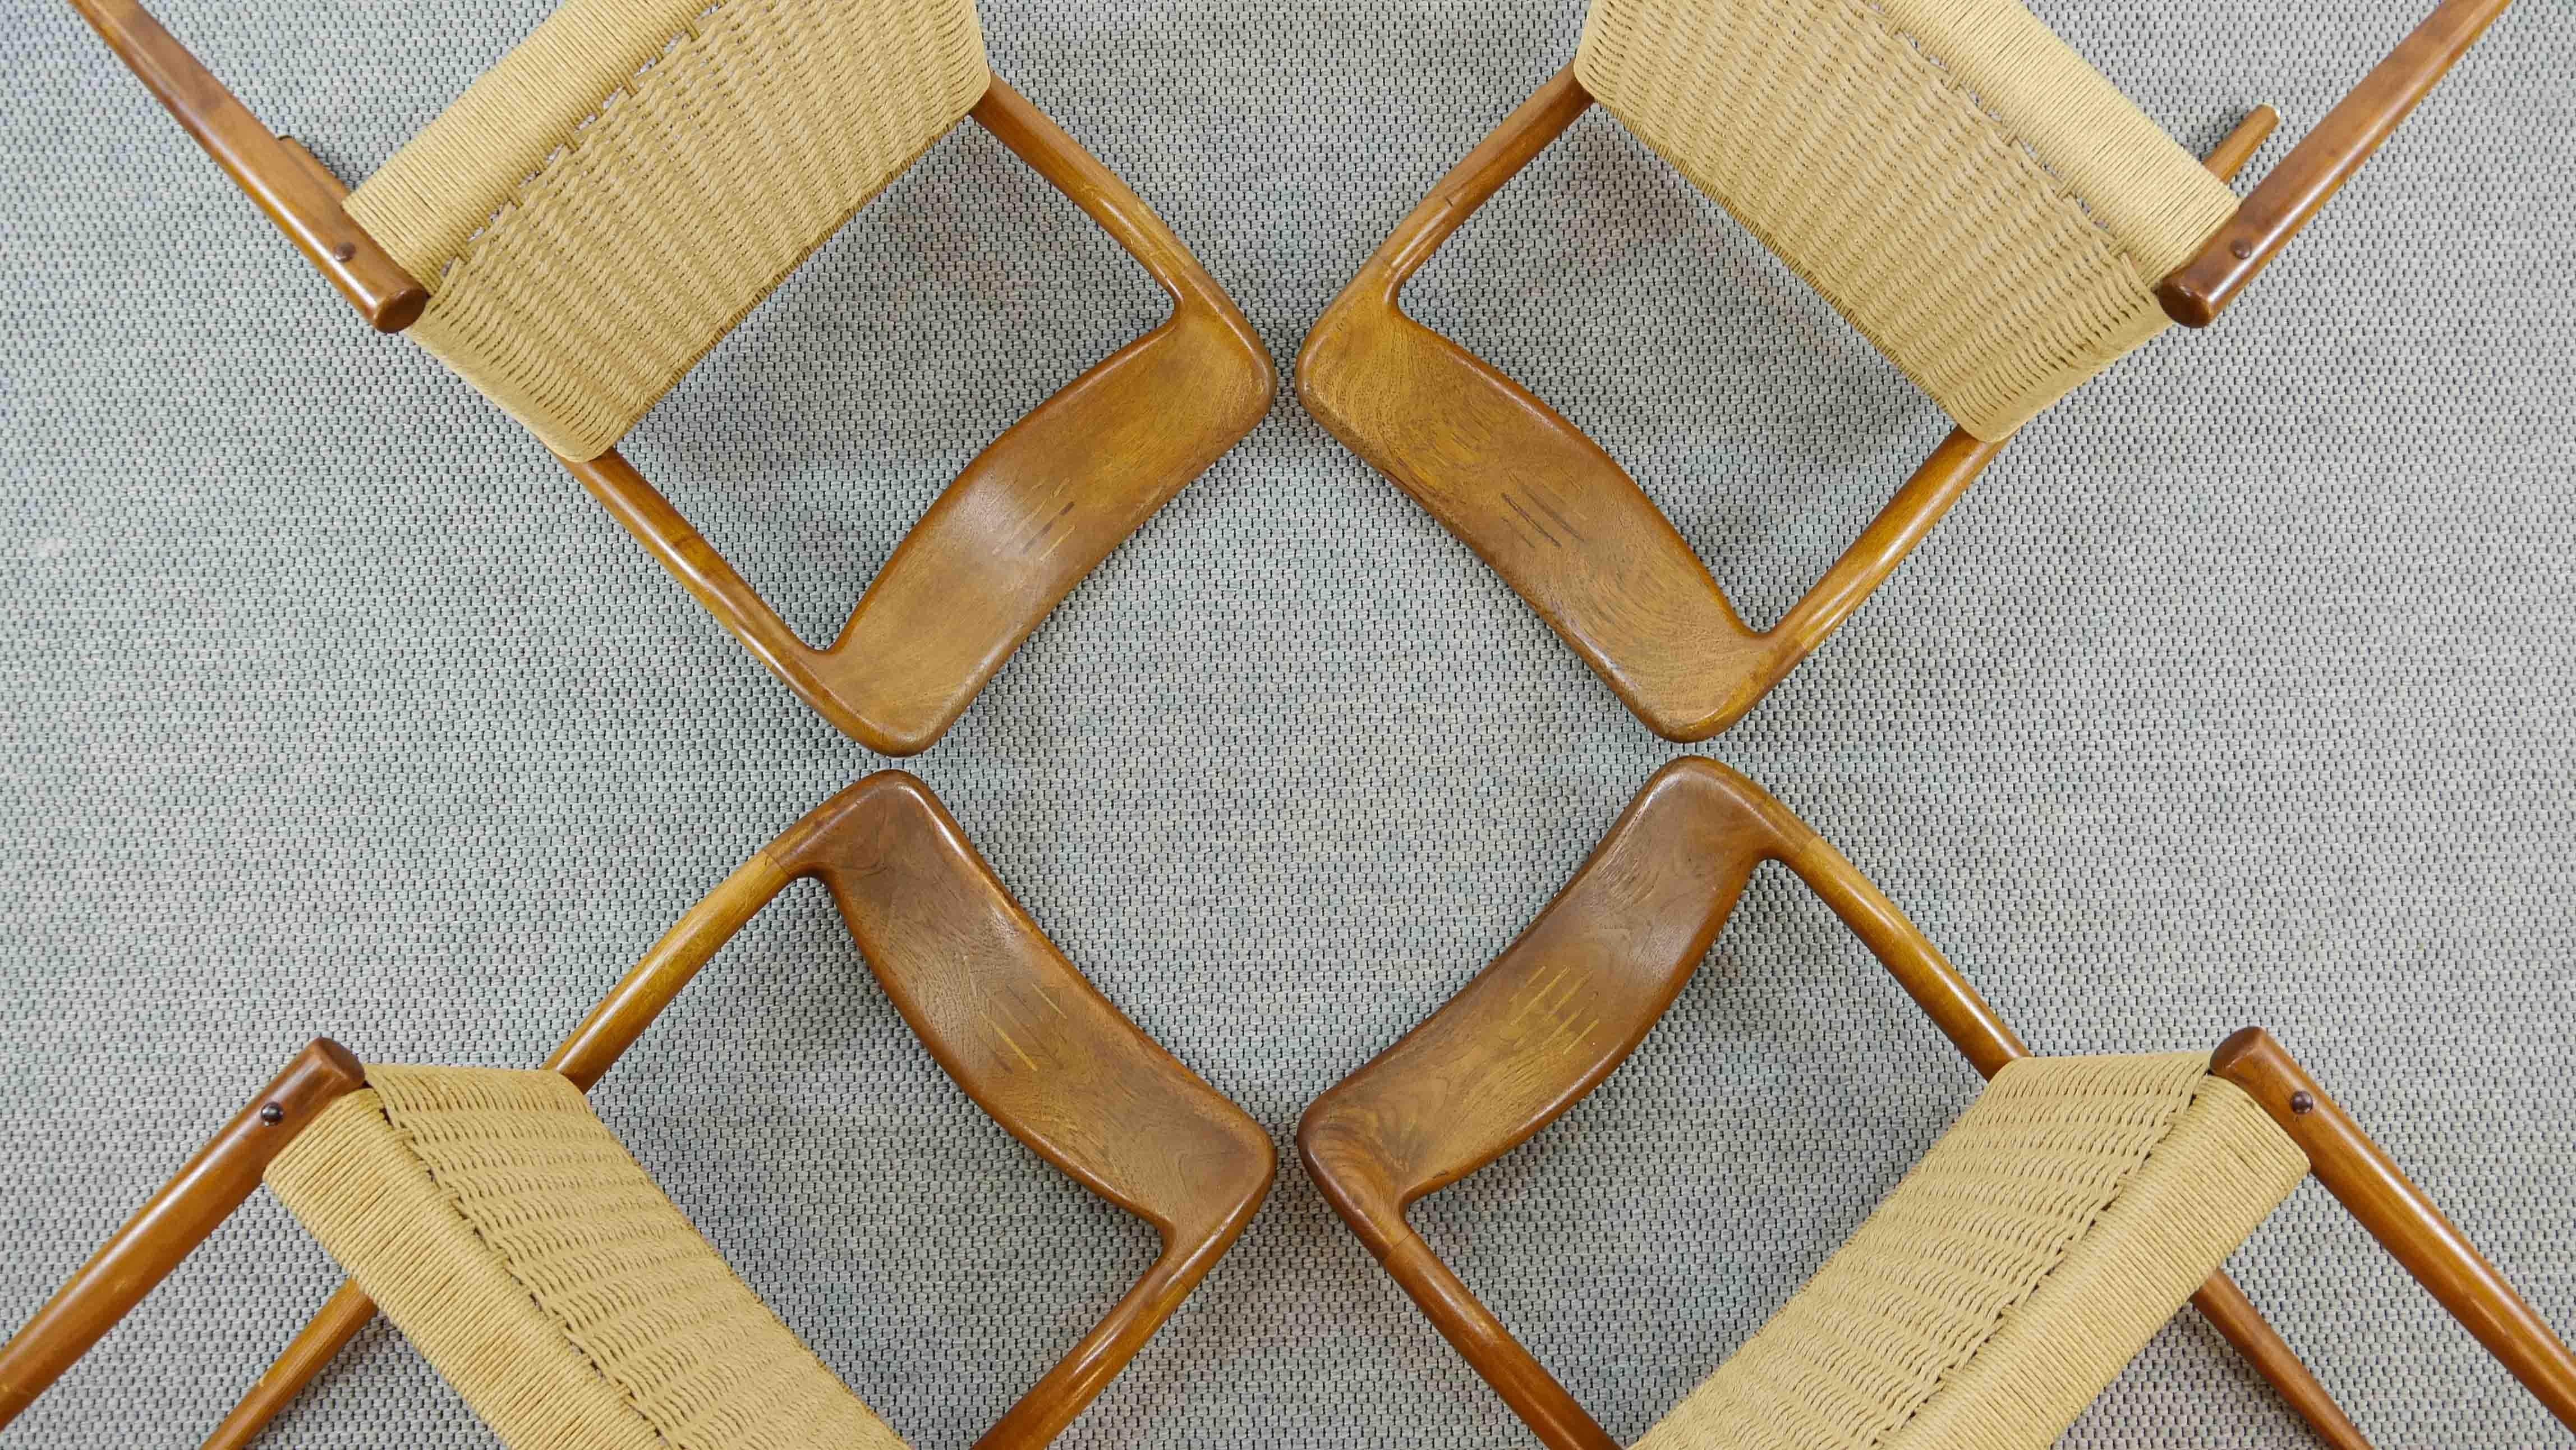 Set of 4 Teak Chairs with Papercord Seat by Johannes Andersen for Uldum, Denmark 1